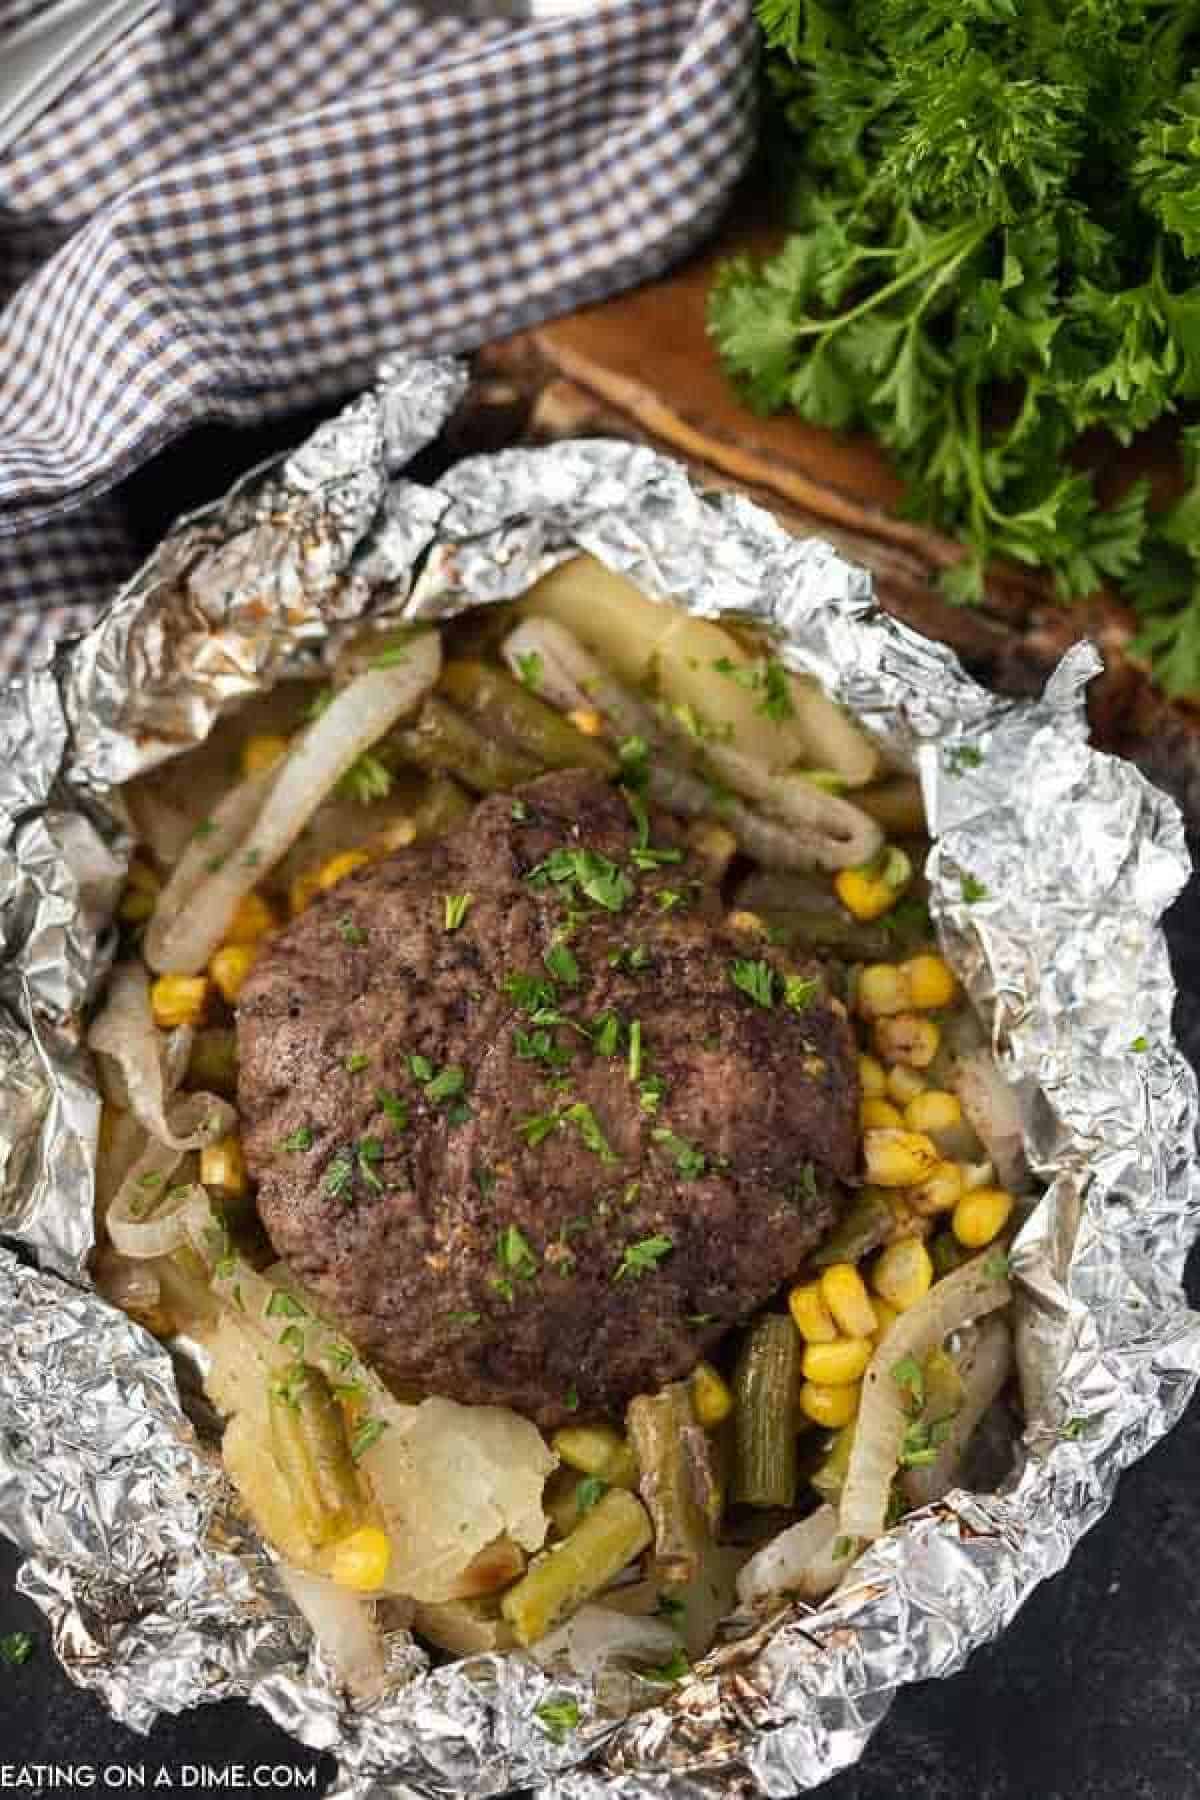 Hamburger patty in a foil packet with corn, slice onions and potatoes